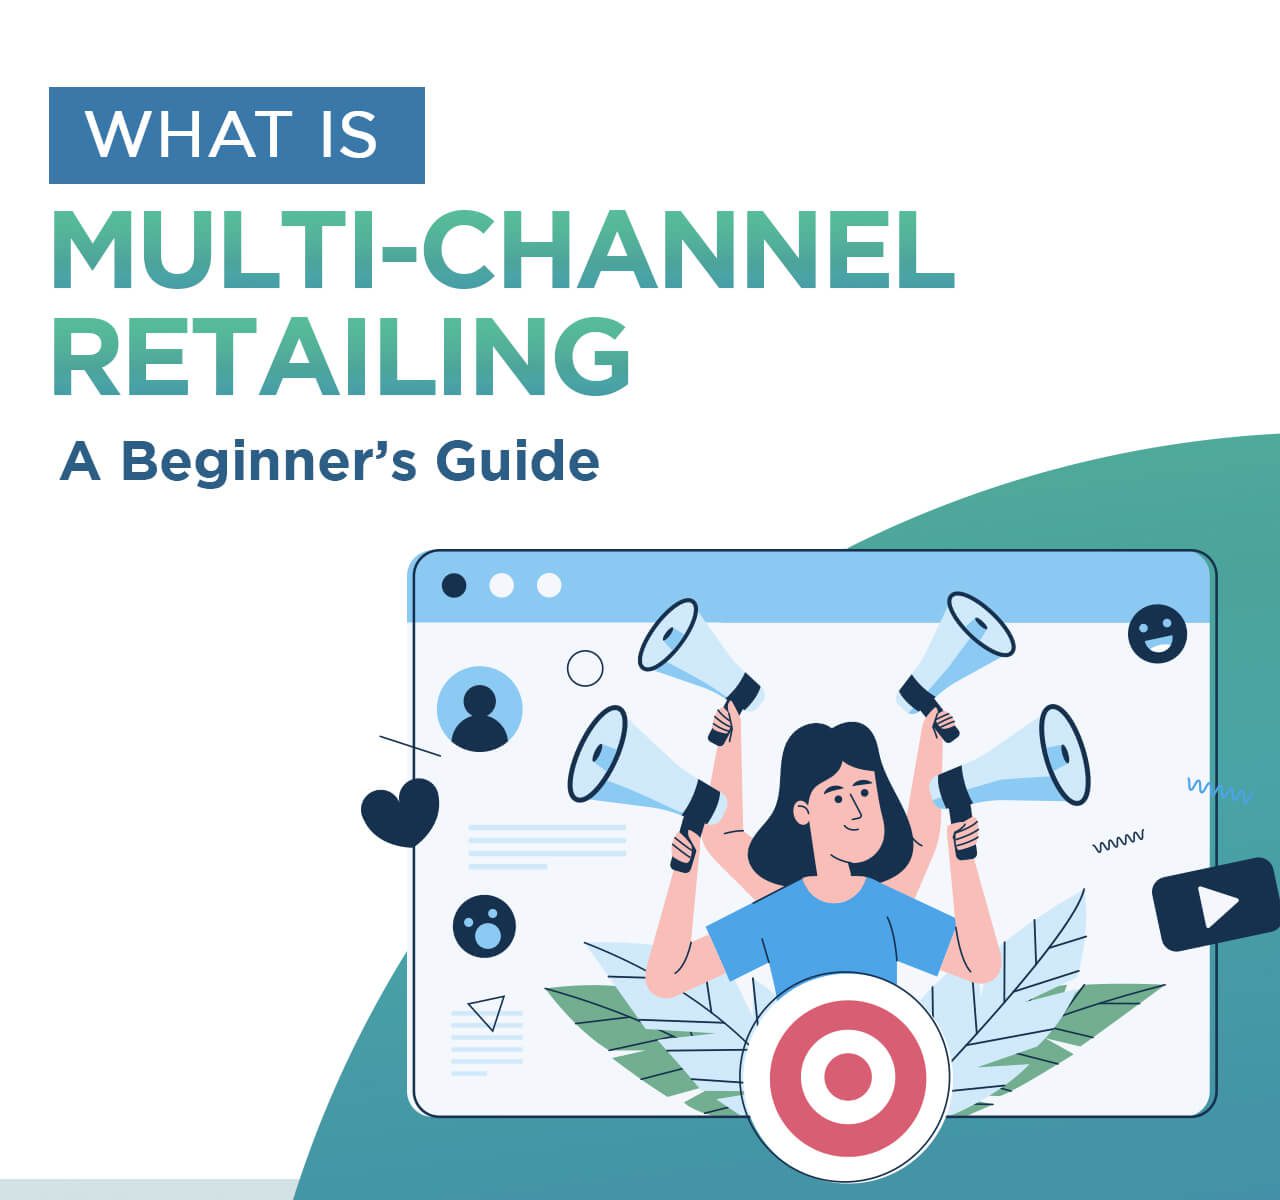 Overview & Benefits of Multi-Channel Retailing